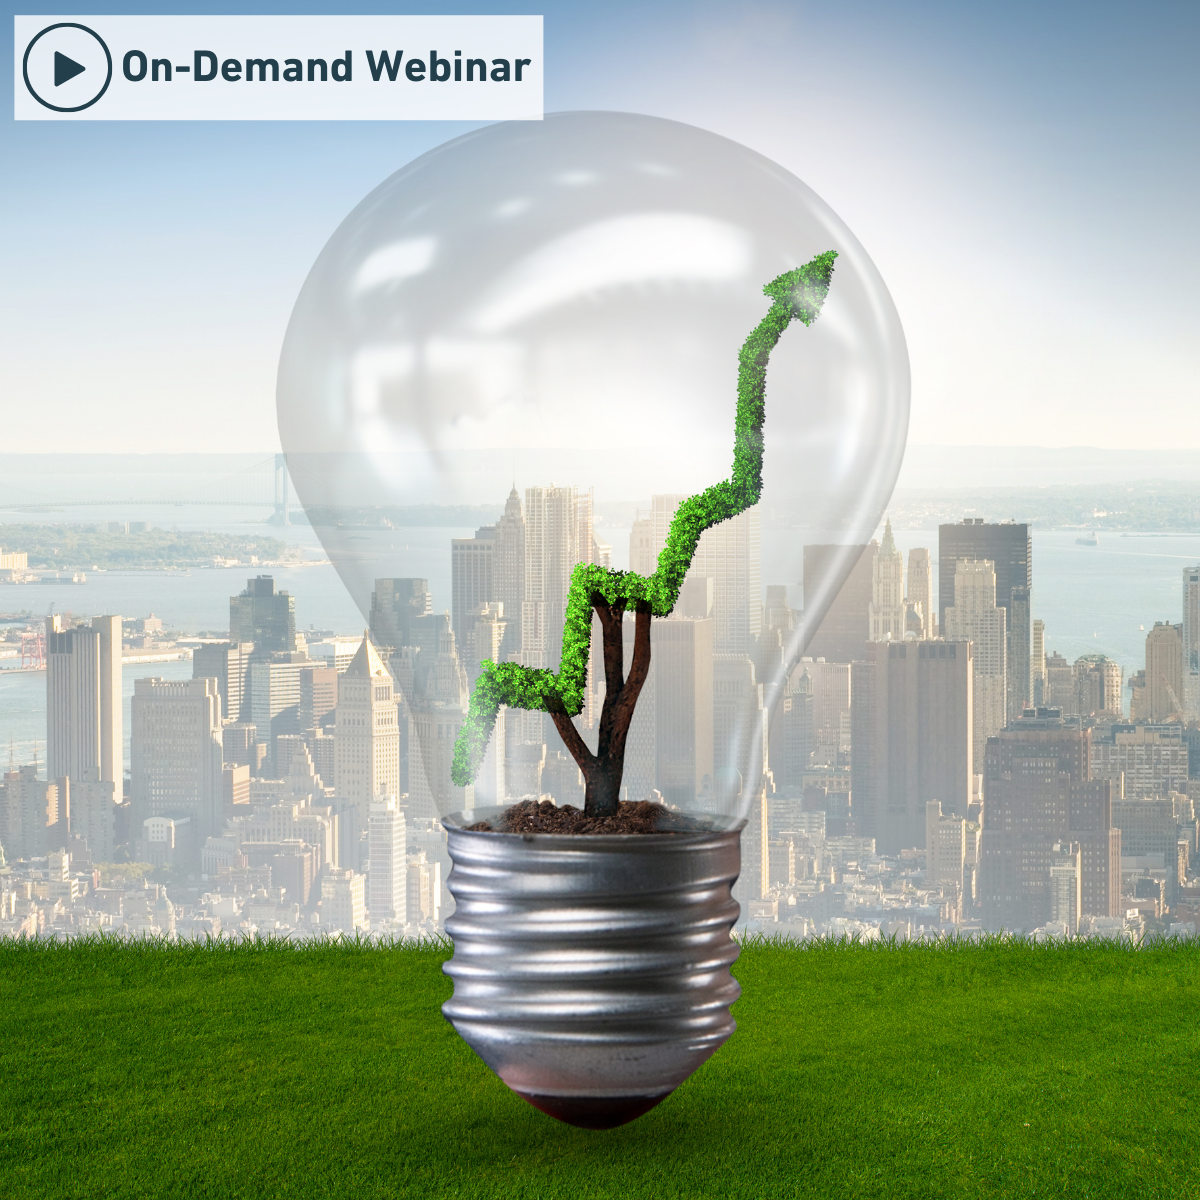 INTERSECTION BETWEEN U.S. POLICY AND MARKETS - Webinars